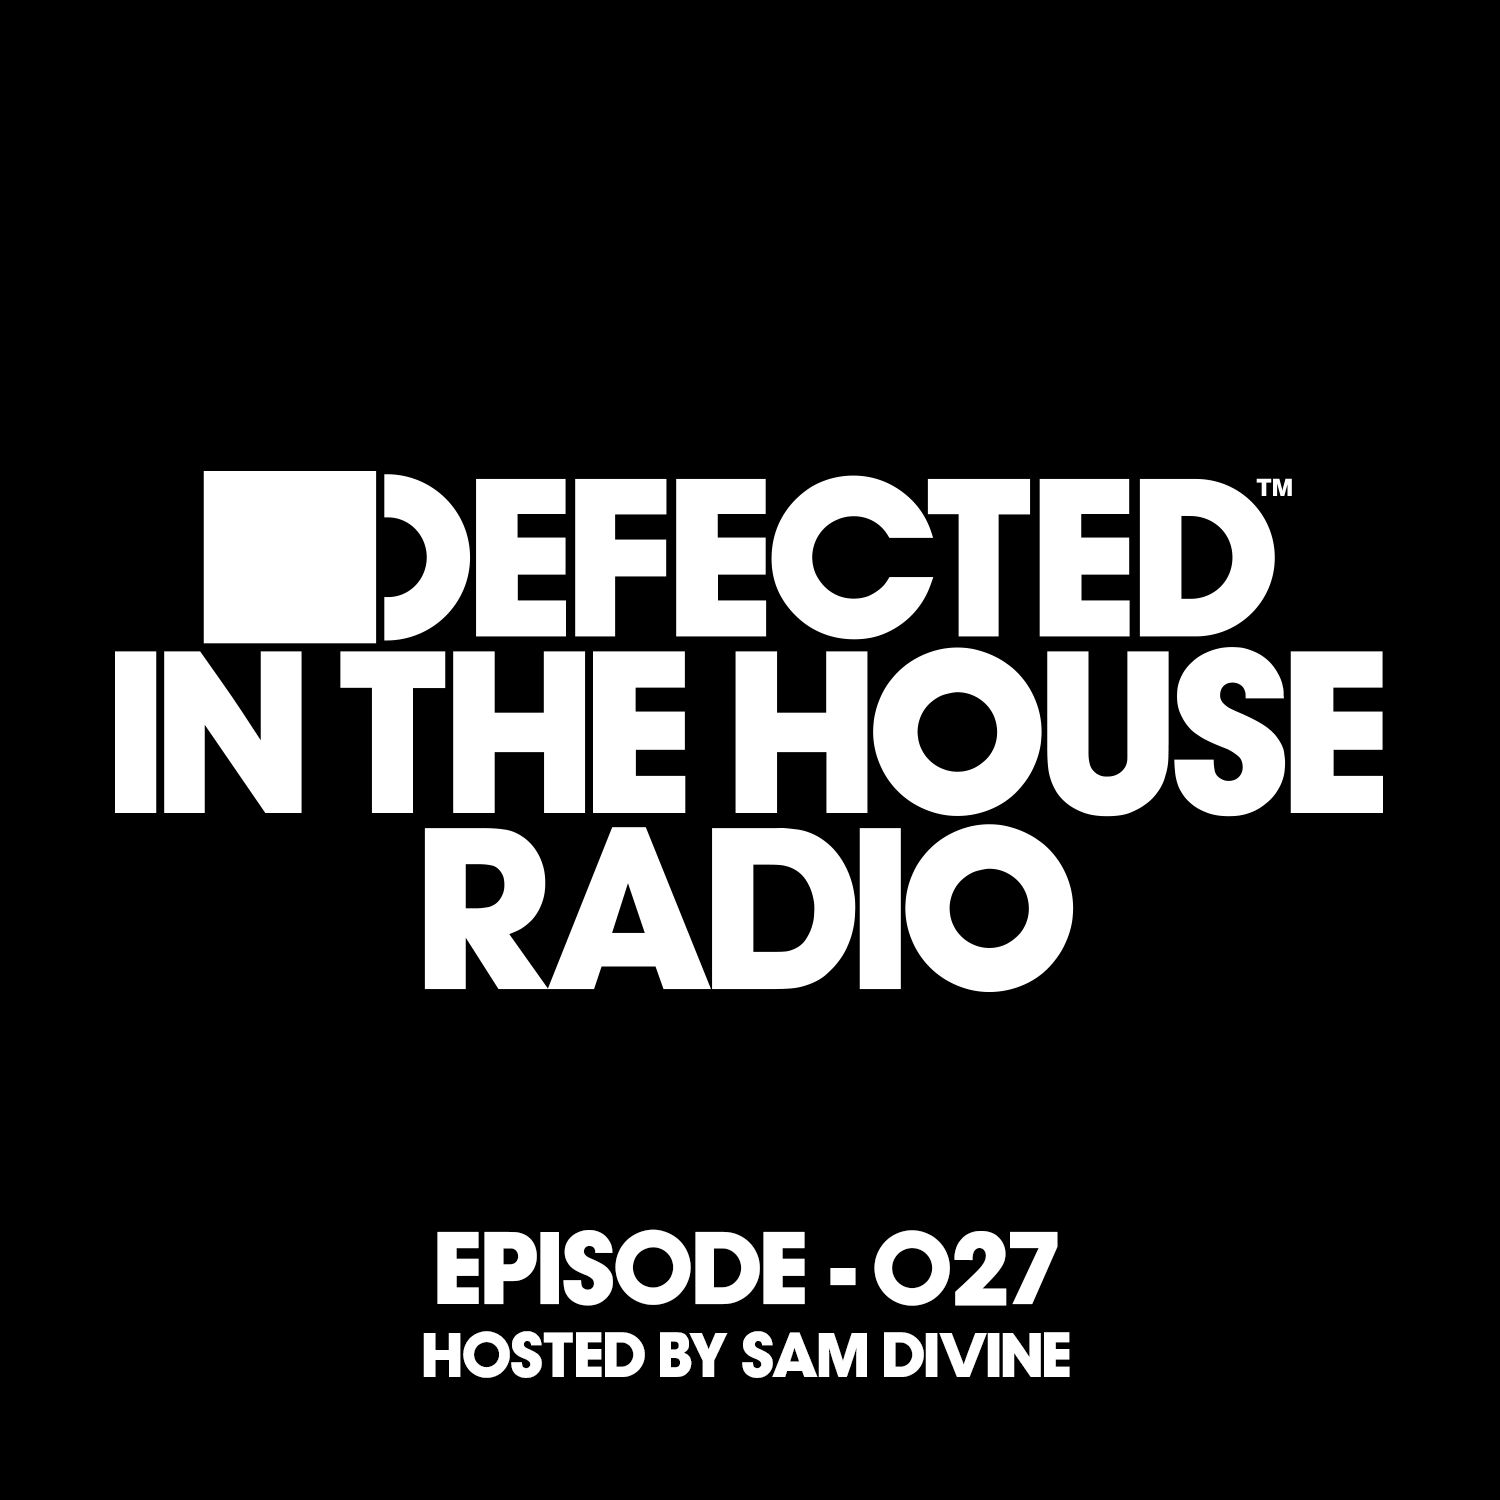 Defected In The House Radio Show Episode 027 (hosted by Sam Divine) [Mixed]